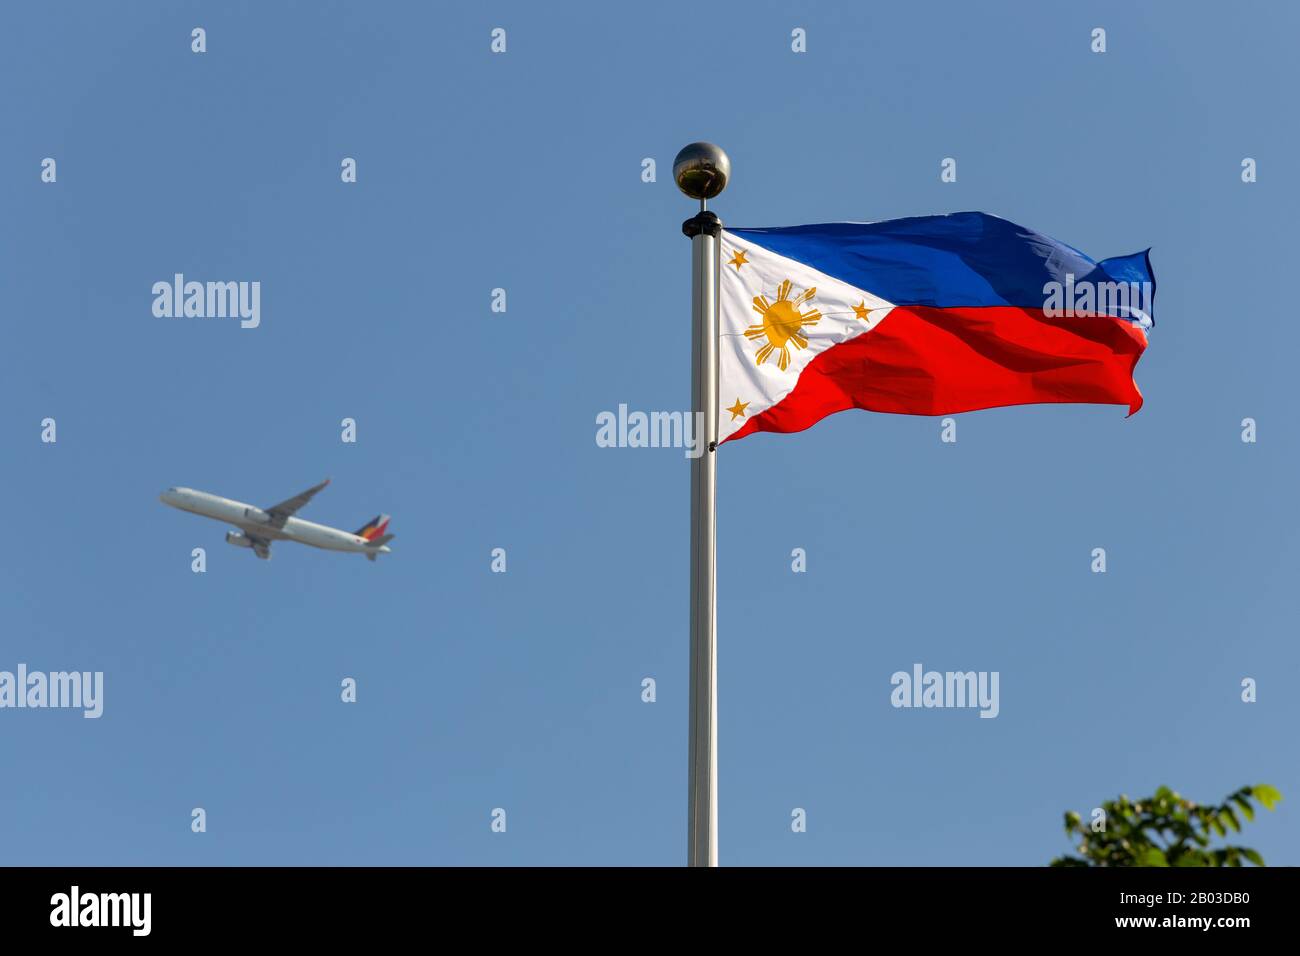 Picture of a Philippines flag and an airplane on background Stock Photo